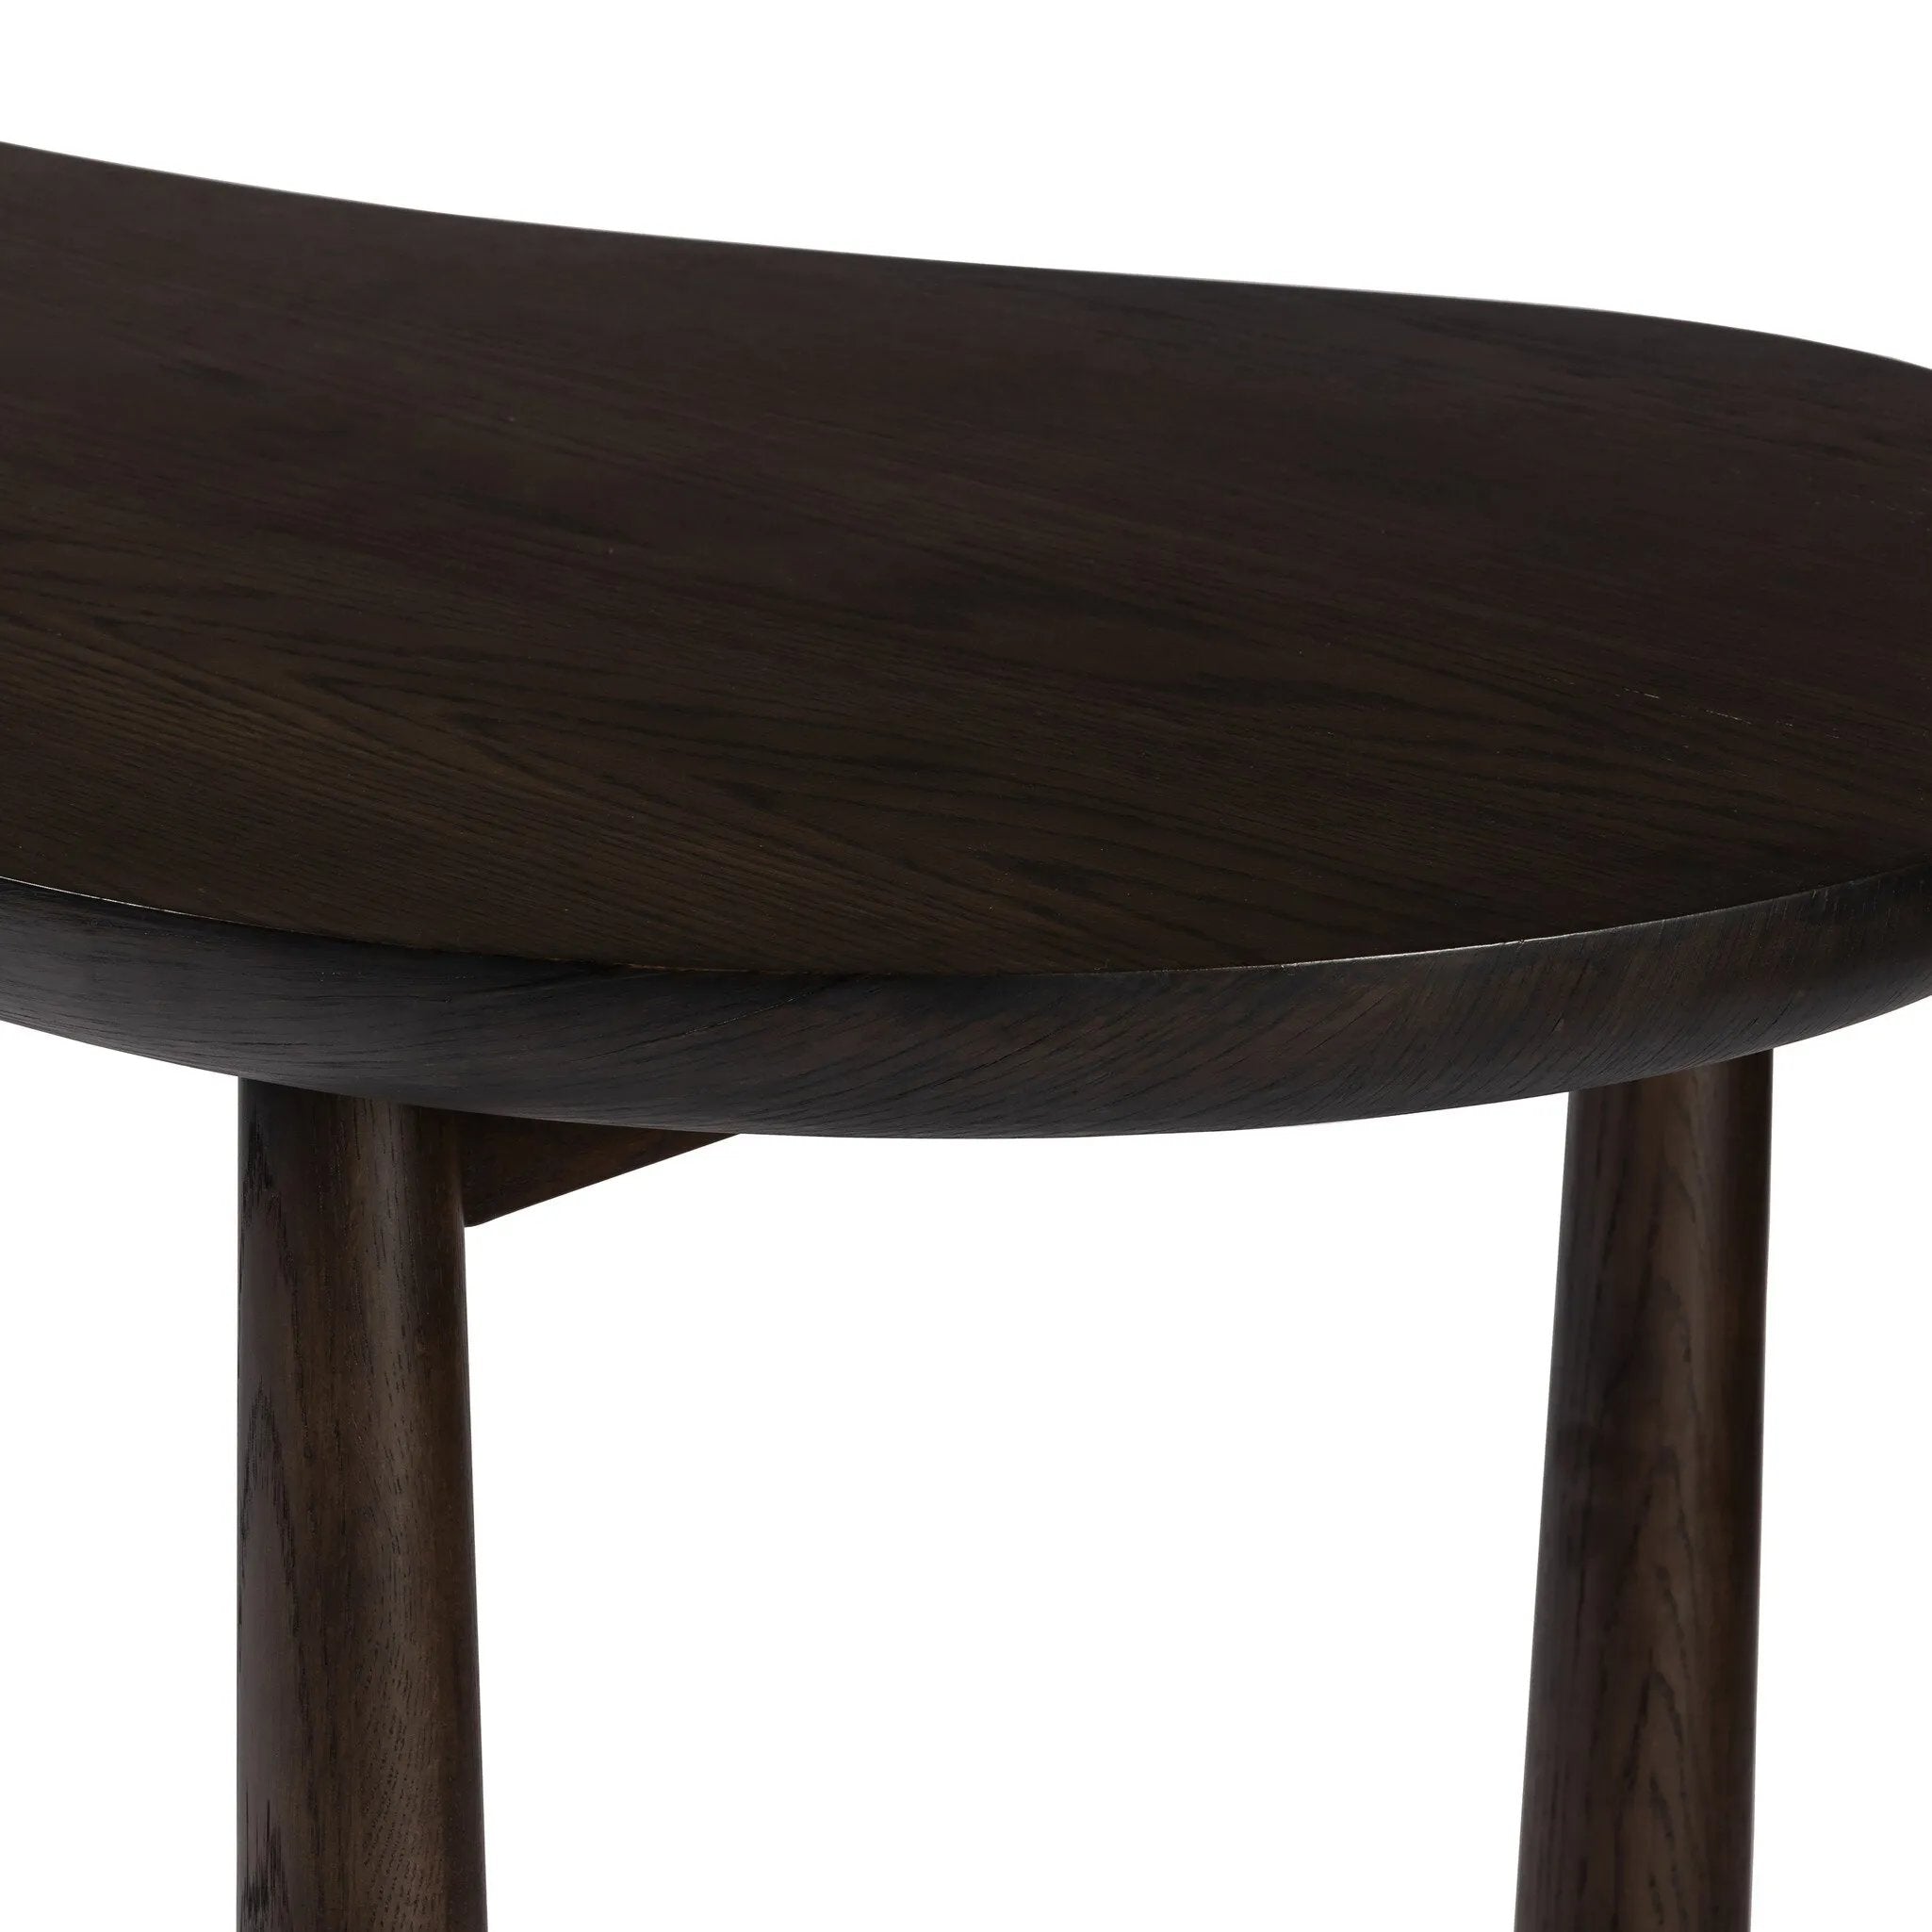 A smoothly shaped desk of brown oak veneer stands on tapered, cylindrical legs, meeting clean lines with an organic aesthetic.Collection: Westgat Amethyst Home provides interior design, new home construction design consulting, vintage area rugs, and lighting in the Newport Beach metro area.